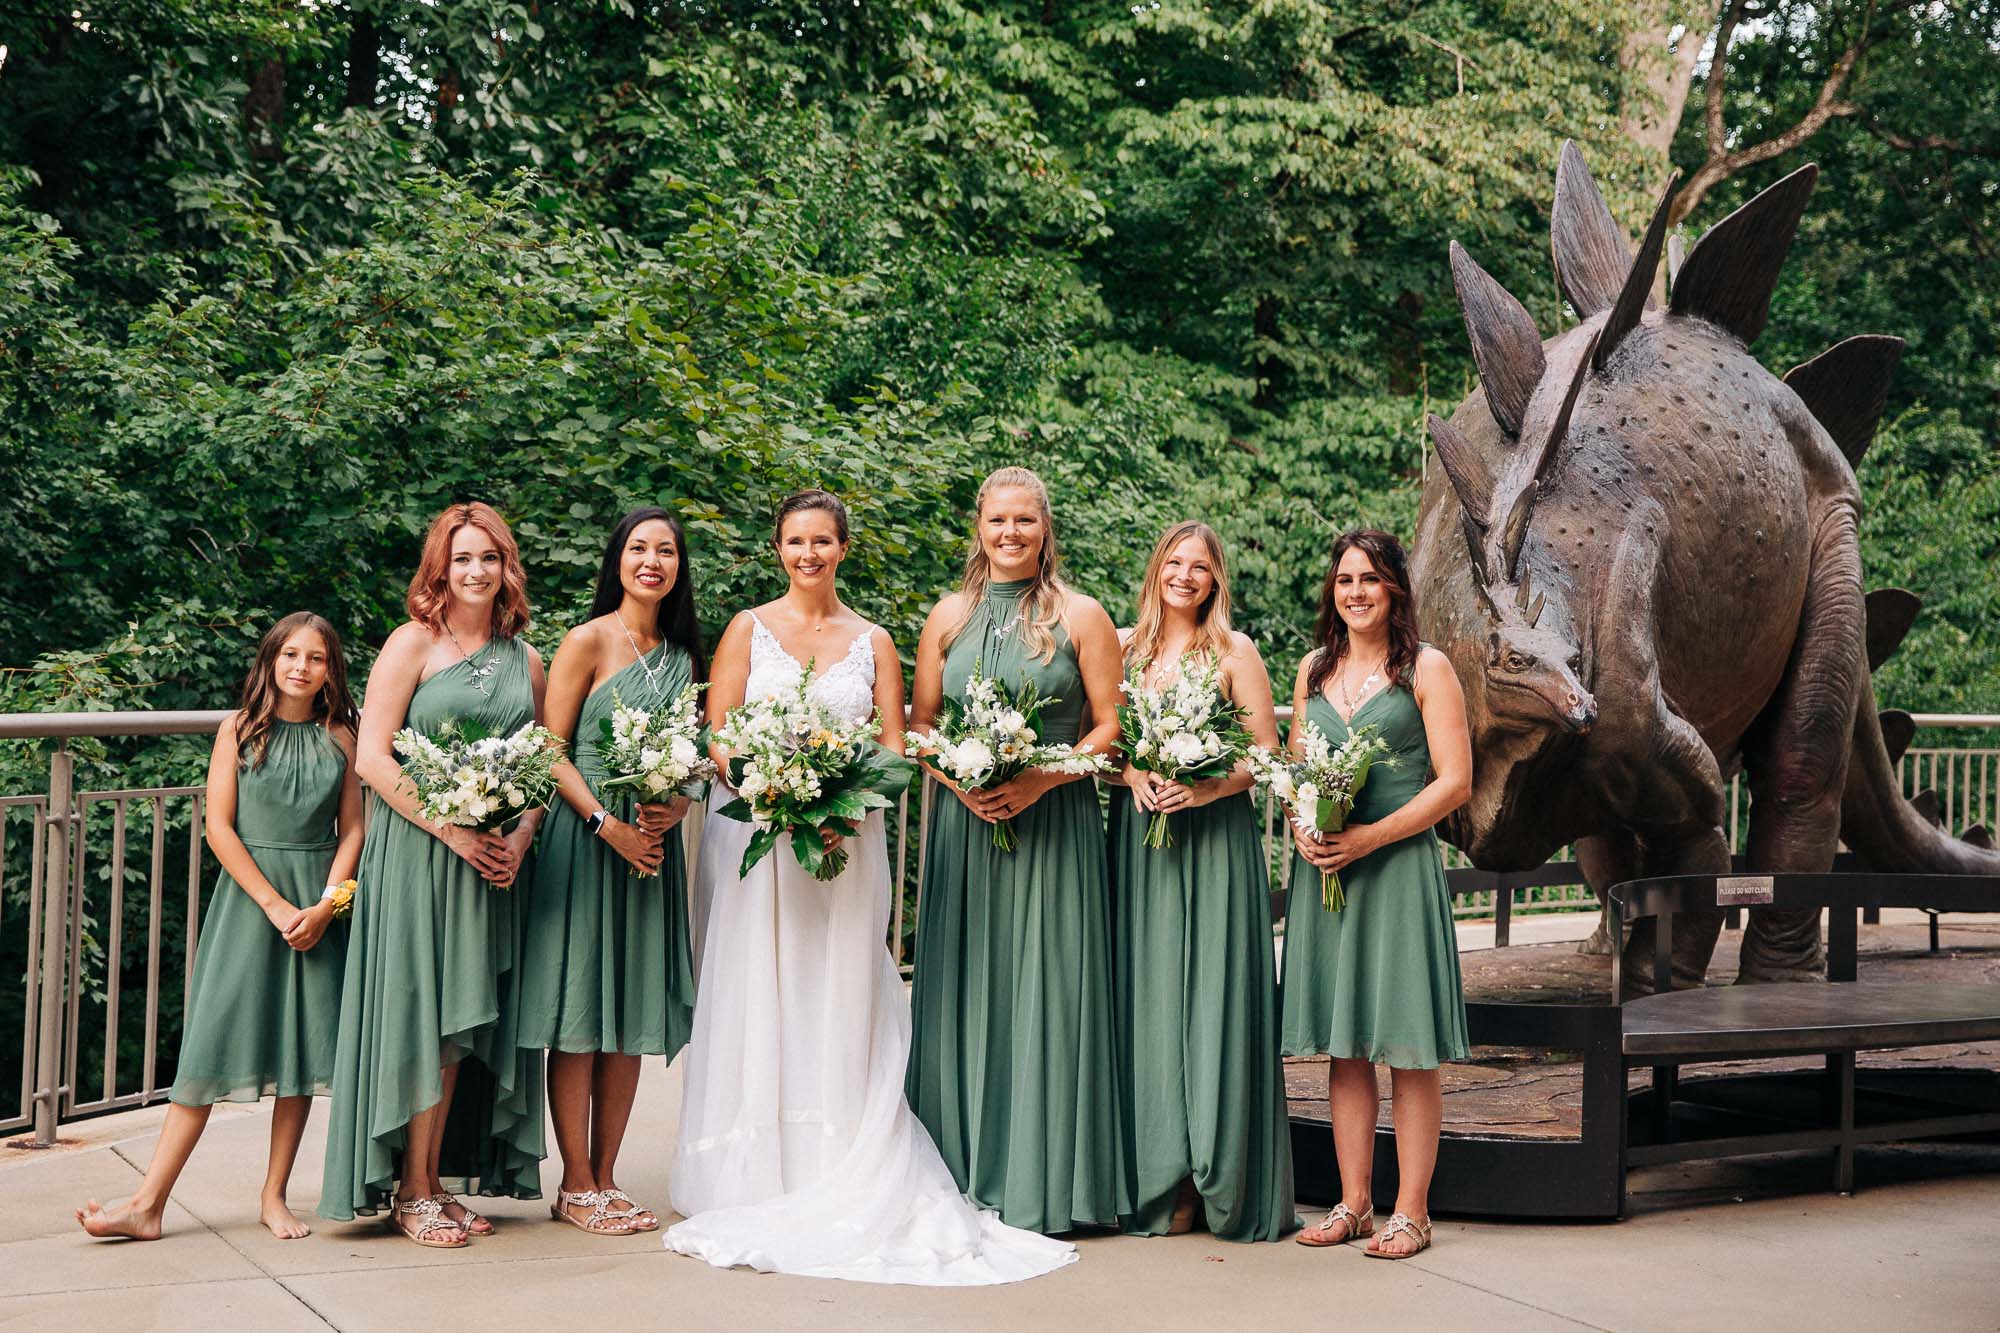 A bride and her bridesmaid stand holding their flowers next to a dinosaur sculpture at Fernbank museum